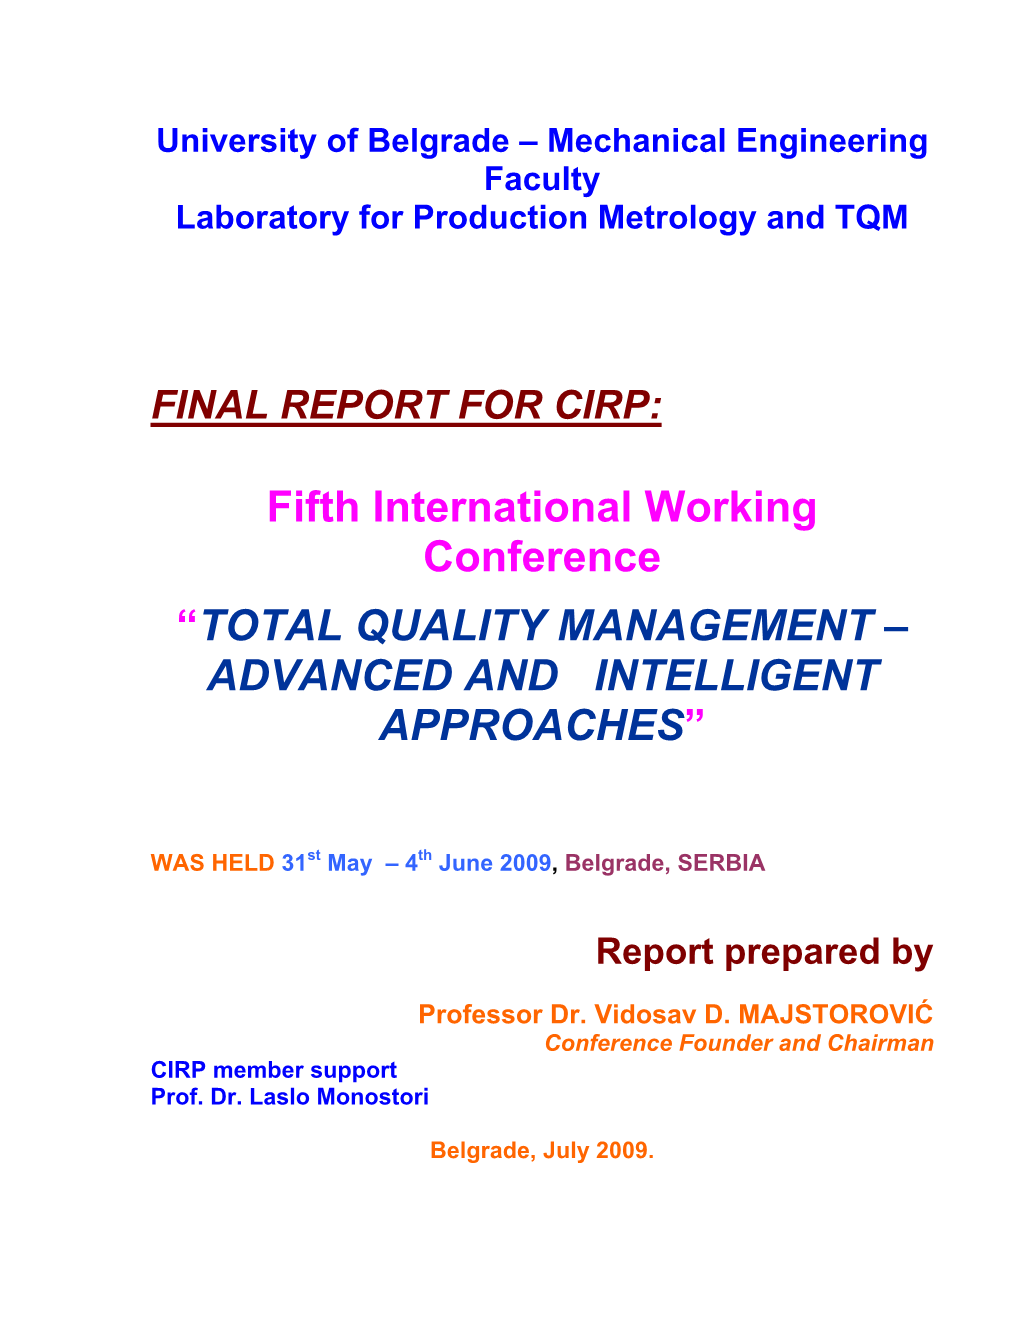 Fifth International Working Conference “TOTAL QUALITY MANAGEMENT